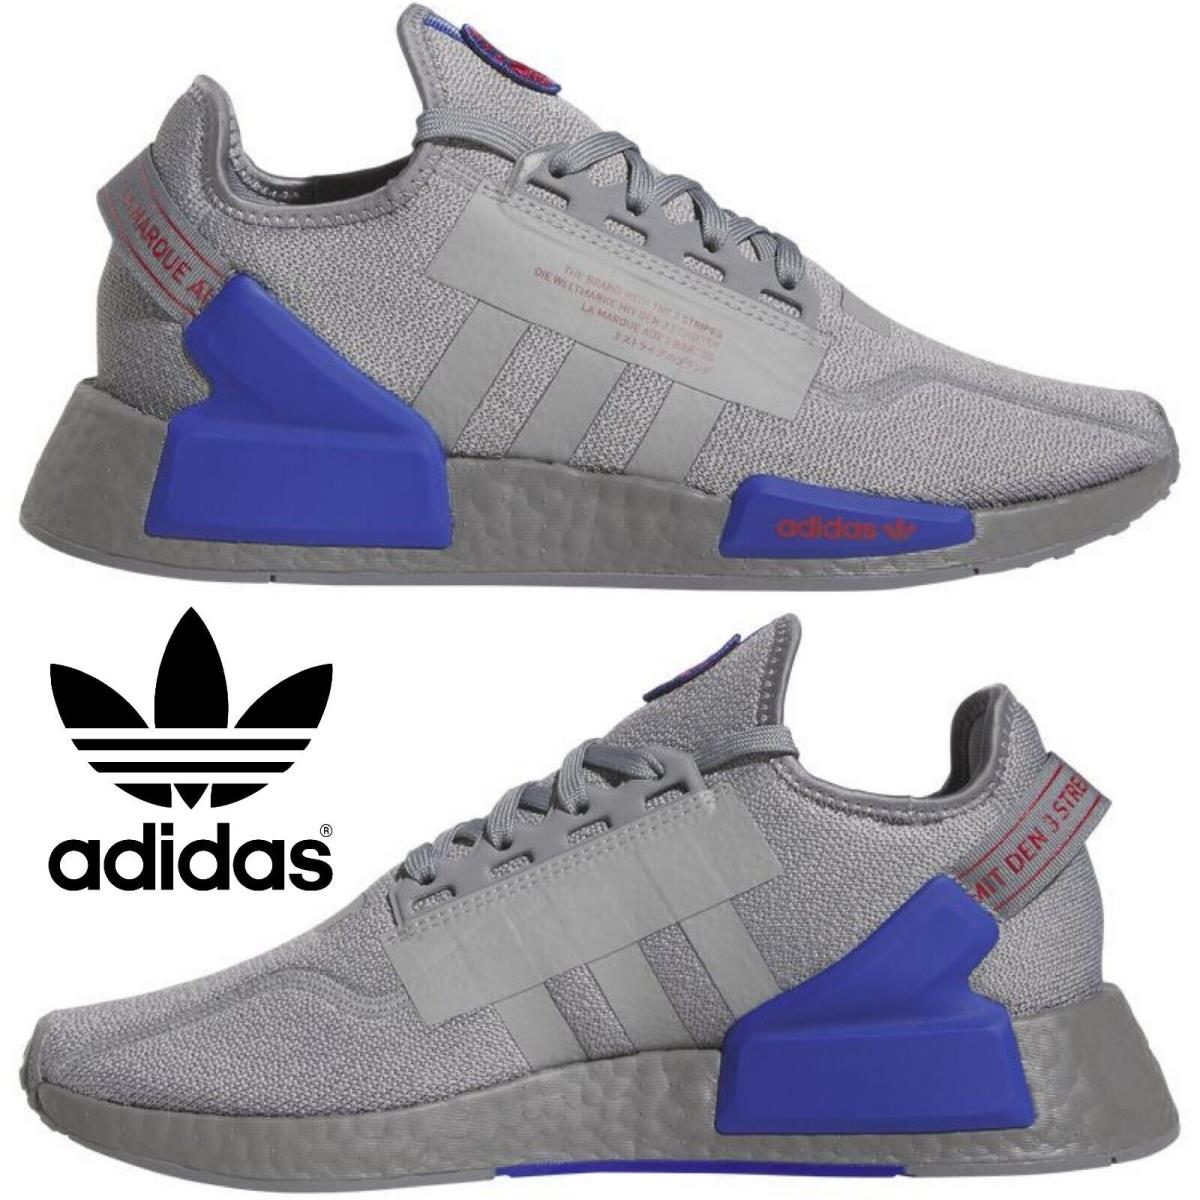 Adidas Originals Nmd R1 V2 Men`s Sneakers Running Shoes Gym Casual Sport Gray - Gray , Grey/Lucid Blue Manufacturer